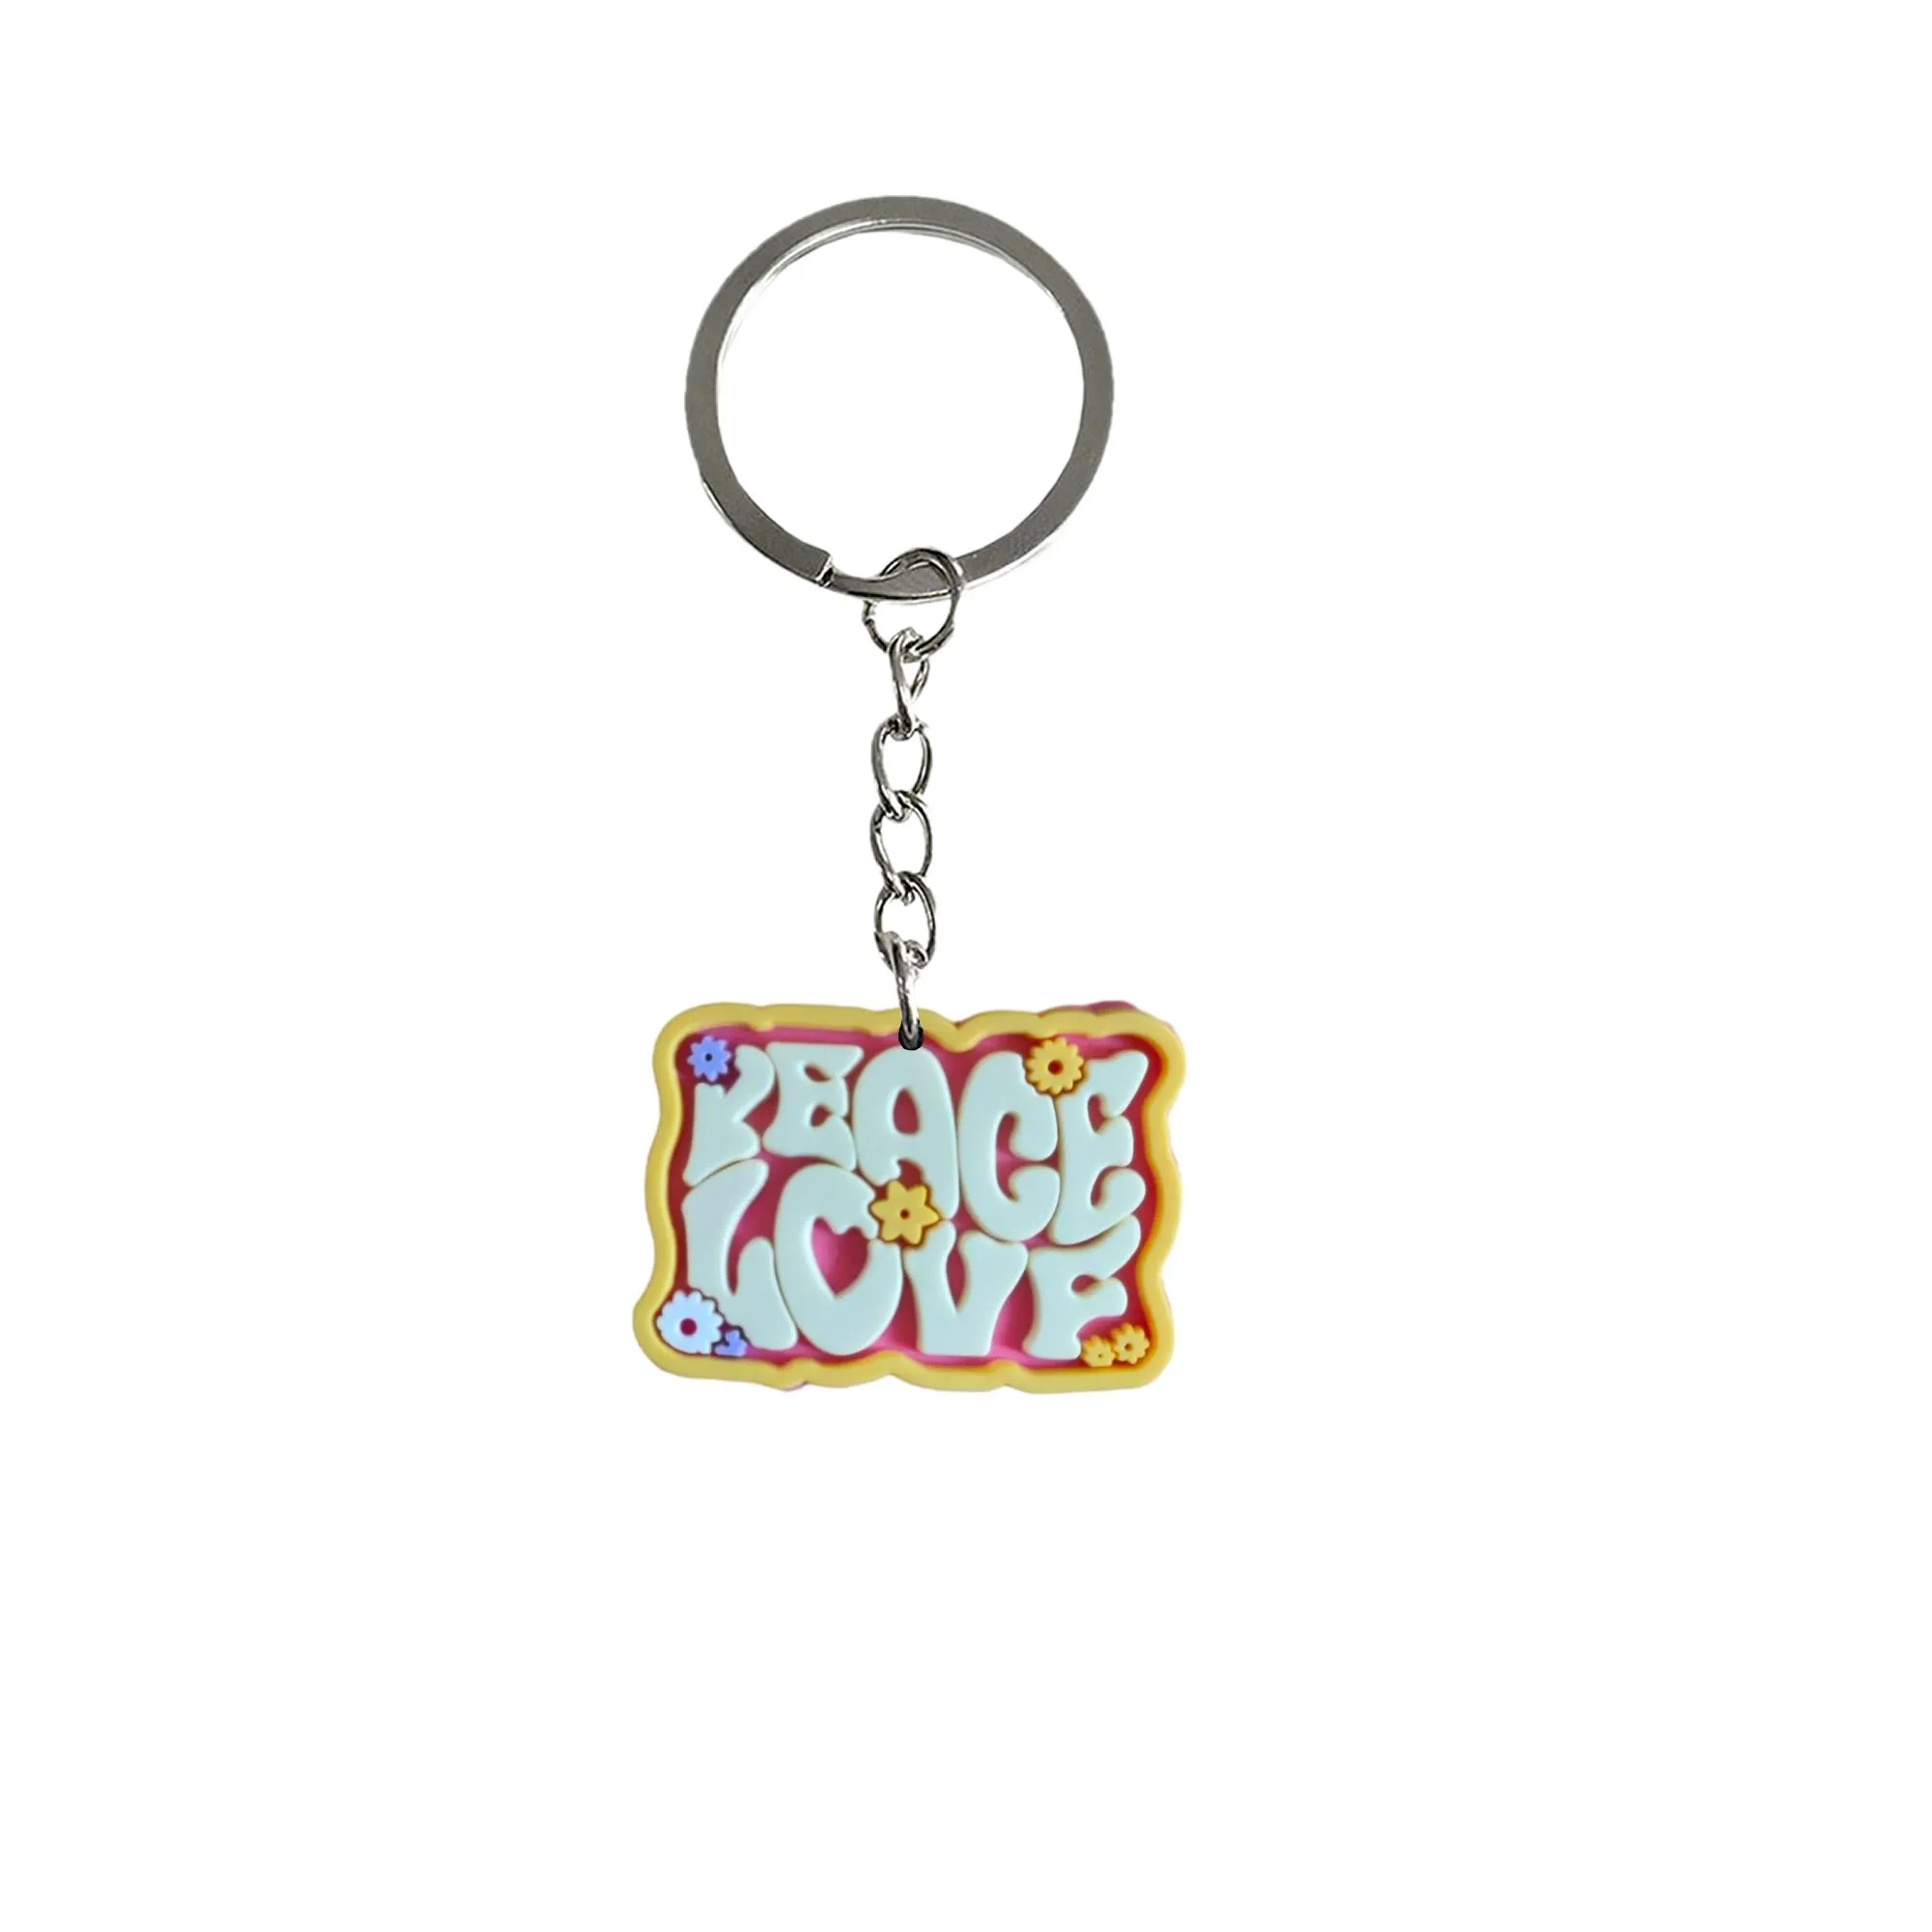 theme of peace 2 16 keychain keyrings for bags birthday christmas party favors gift kids keyring suitable schoolbag car bag key pendant accessories ring girls